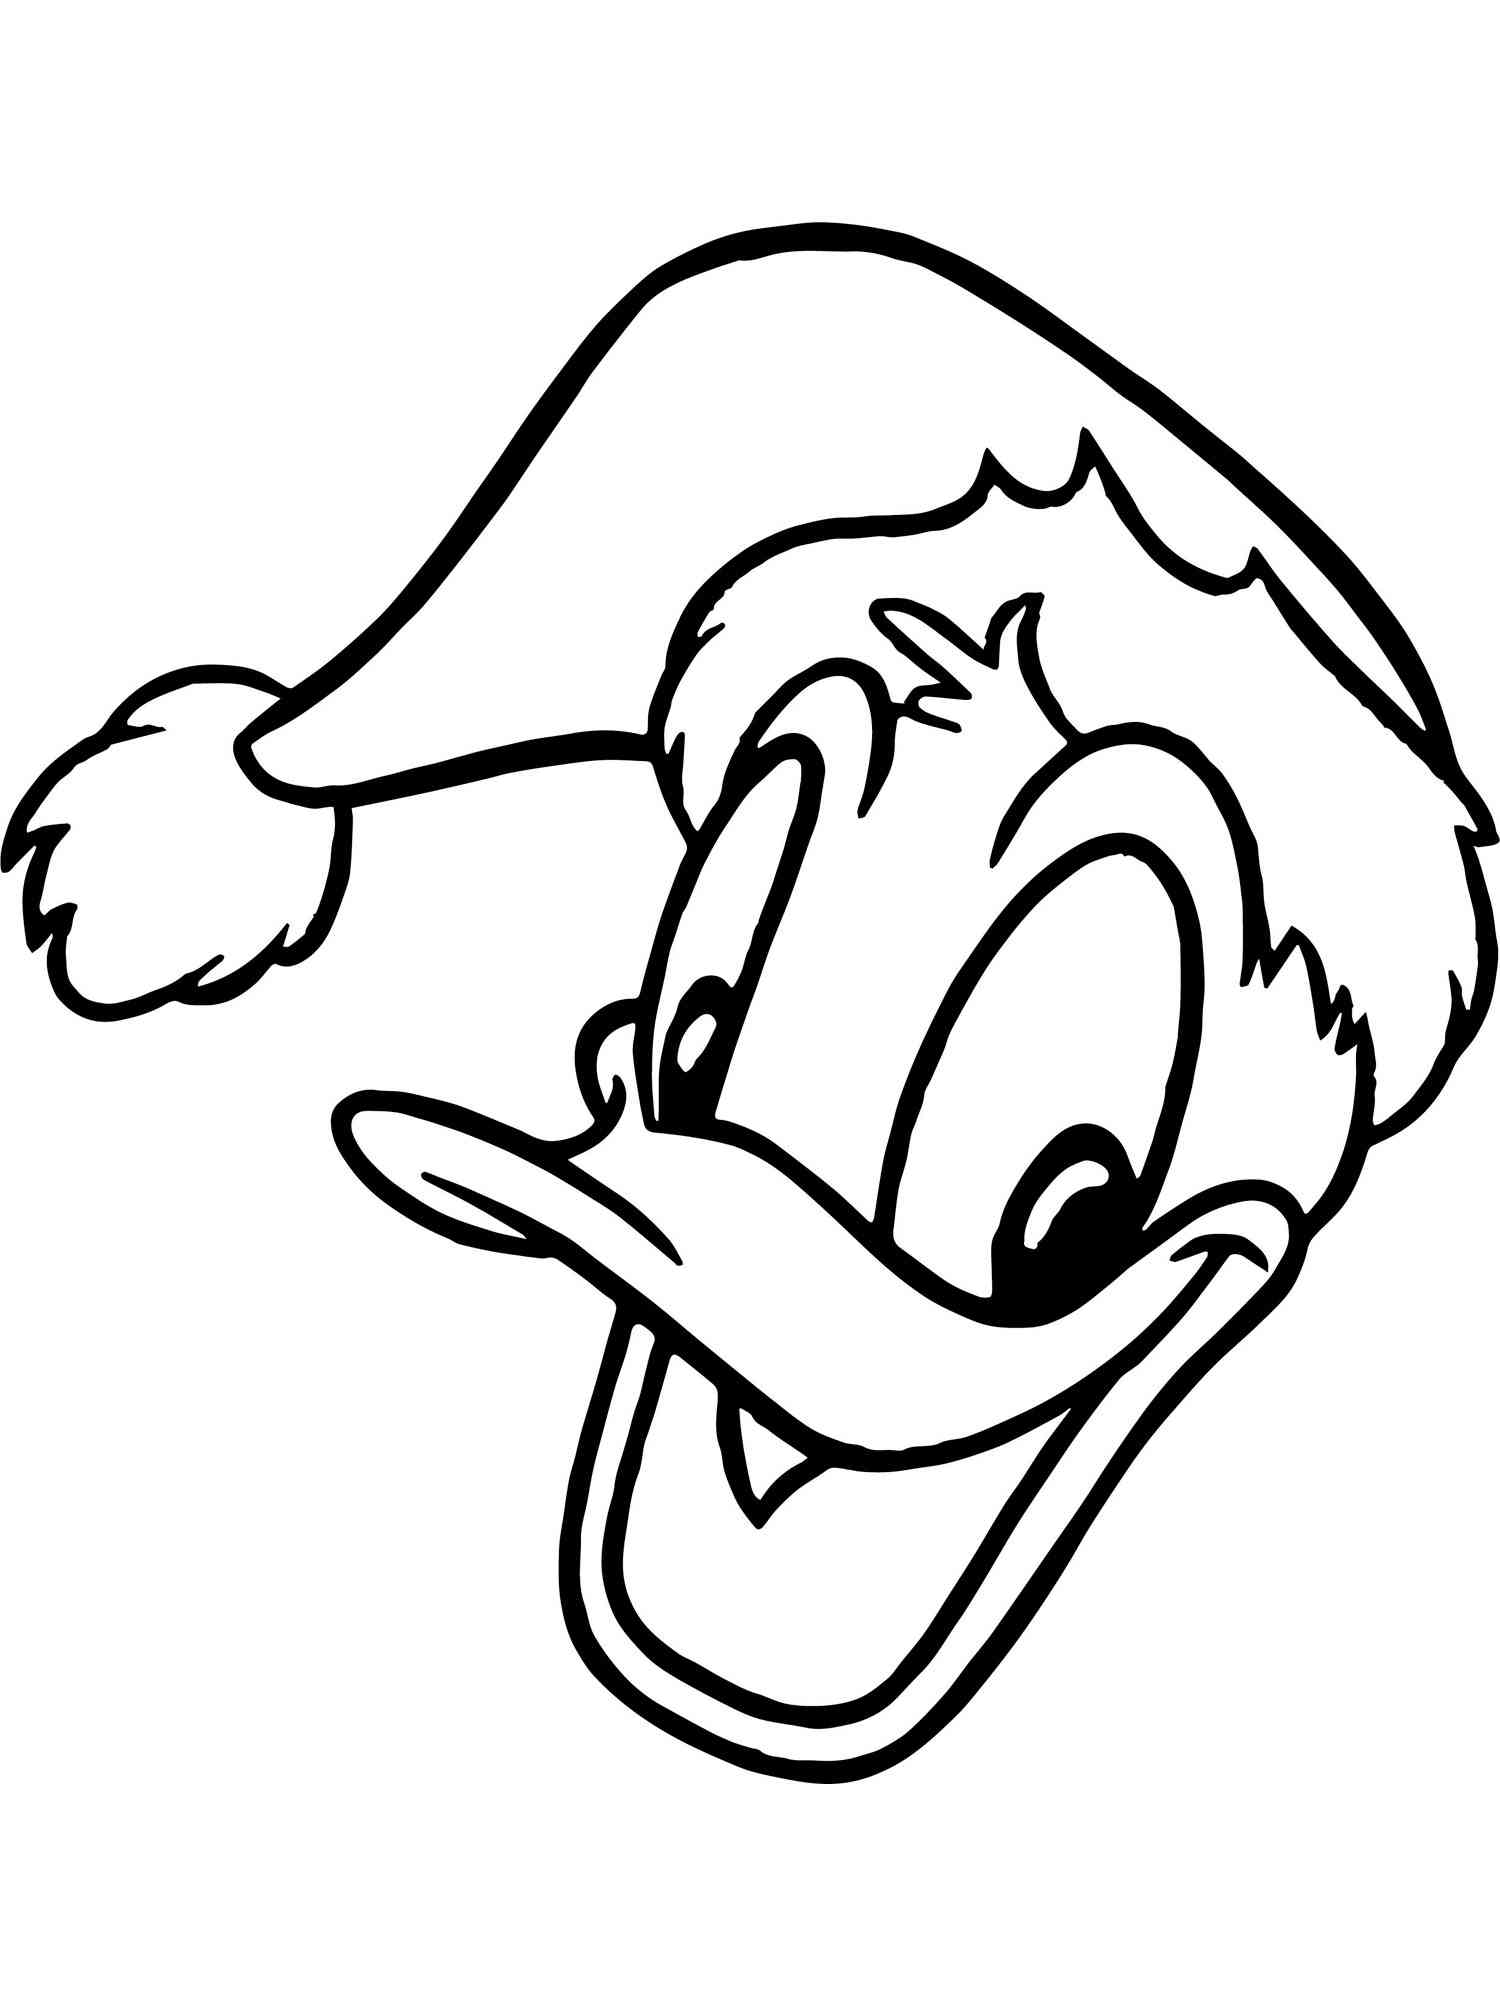 daisy duck face coloring page